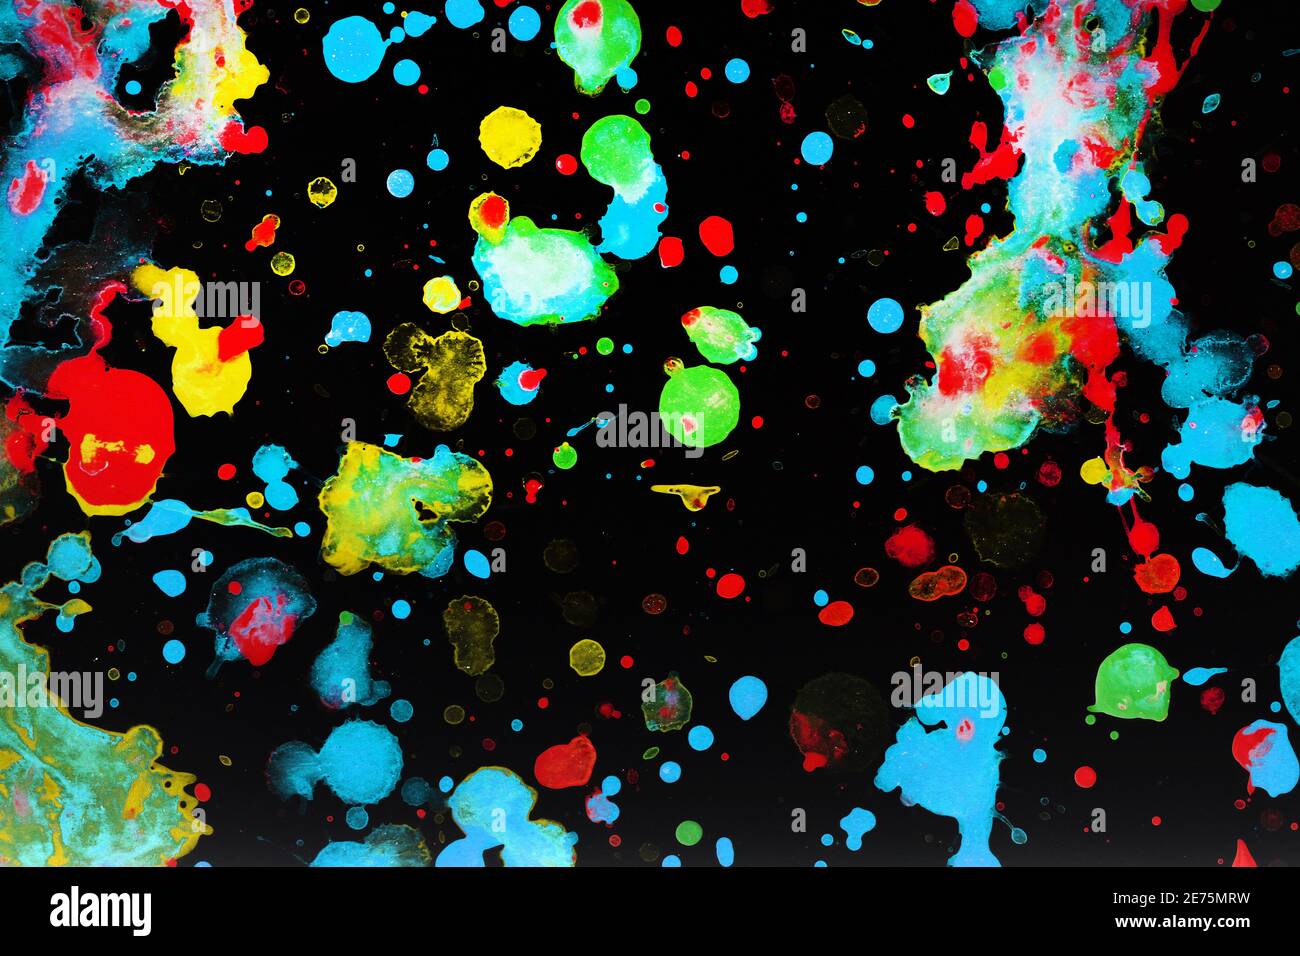 Speckled paint of different colors on a black background Stock Photo